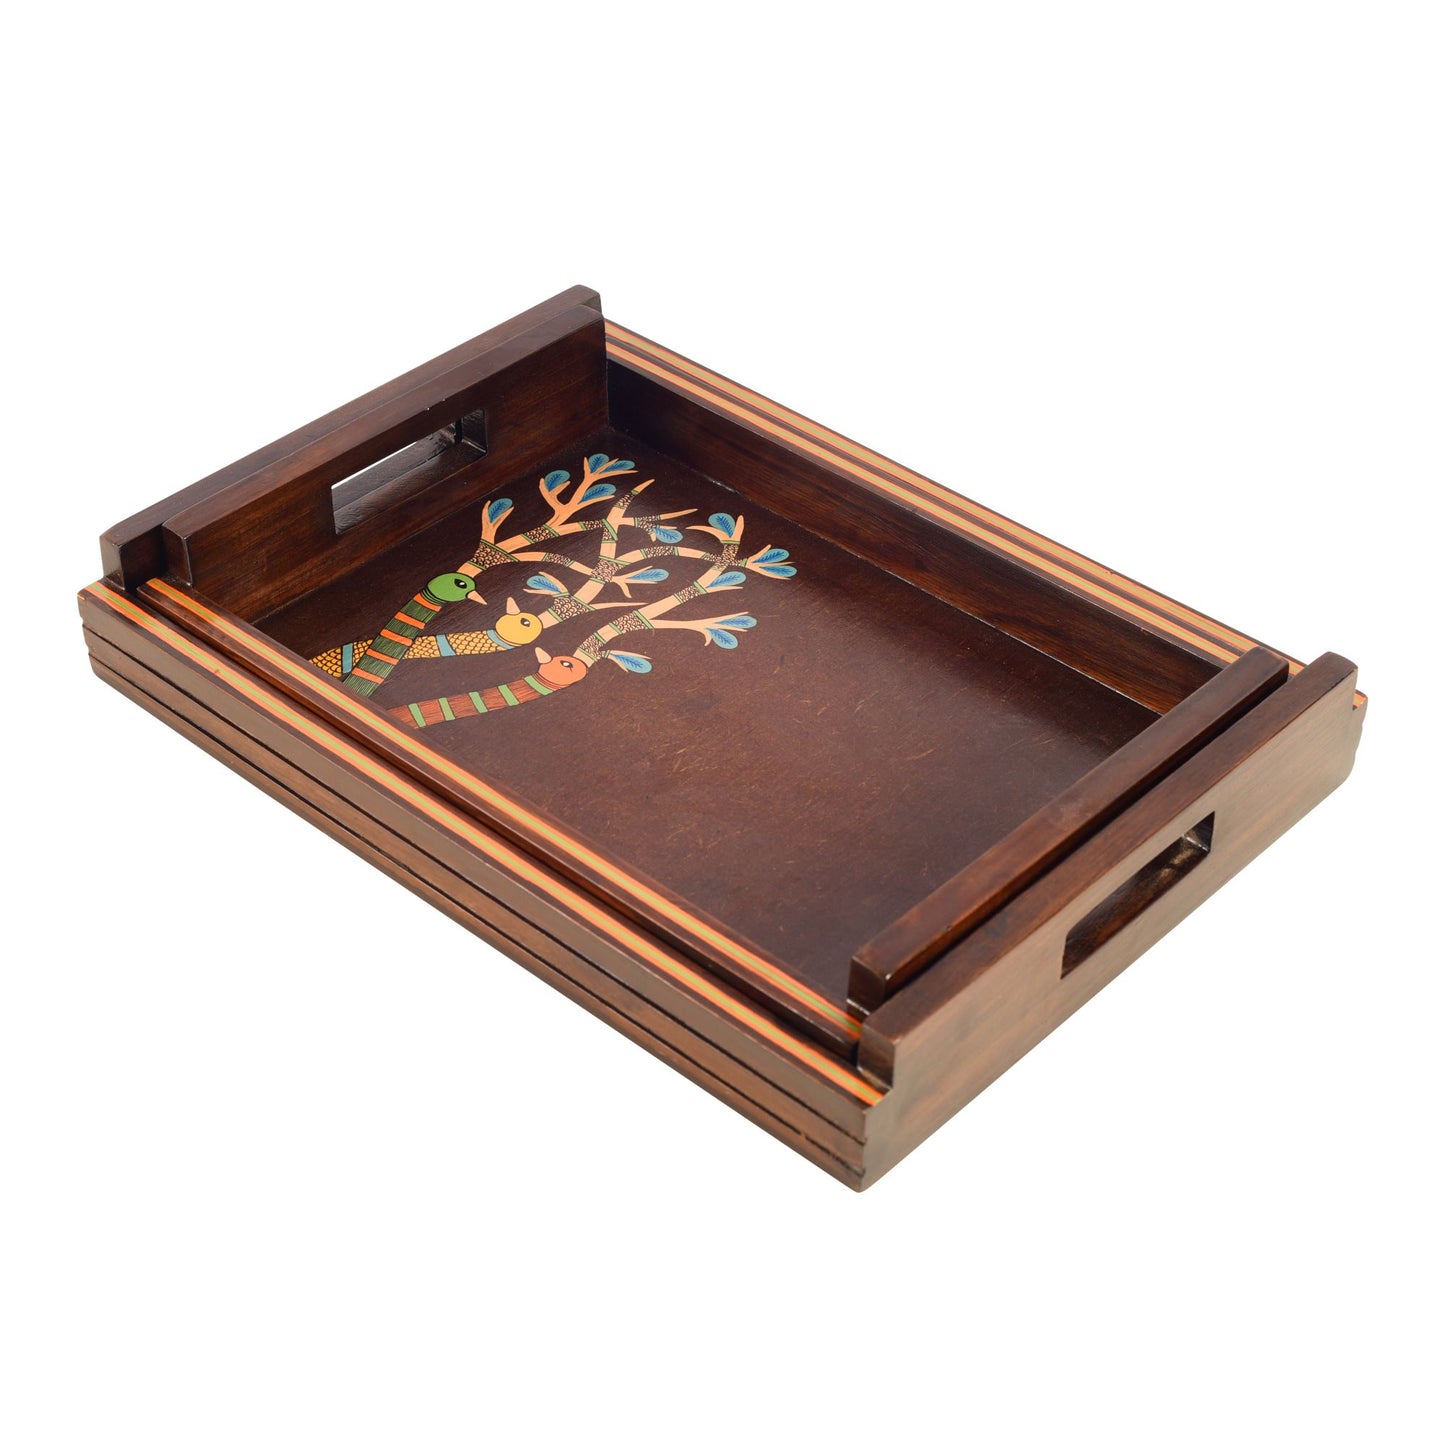 Chriping Birds Handcrafted Serving Tray (Set of 2)